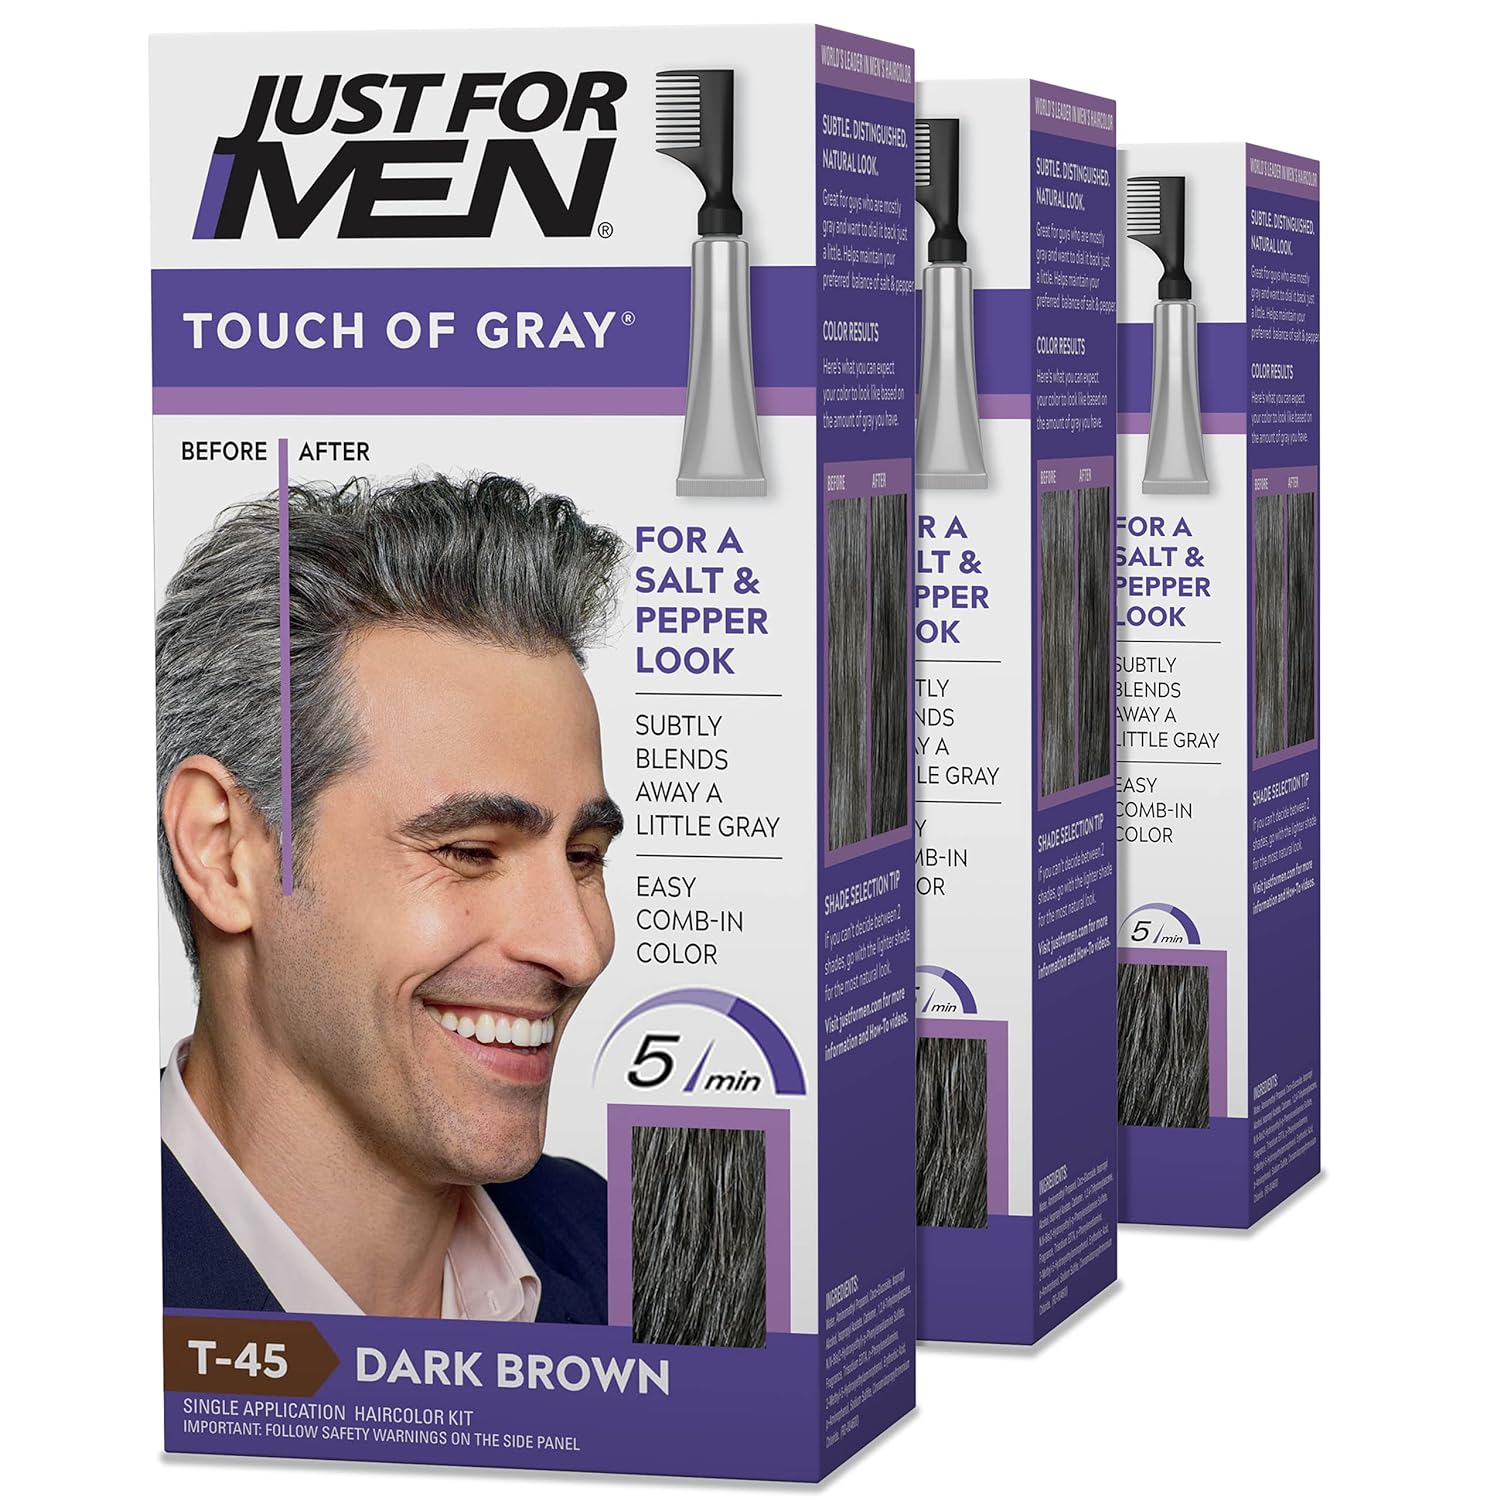 Just For Men Touch of Gray, Gray Hair Coloring for Men with Comb Applicator Dark Brown, T-45 - Pack 